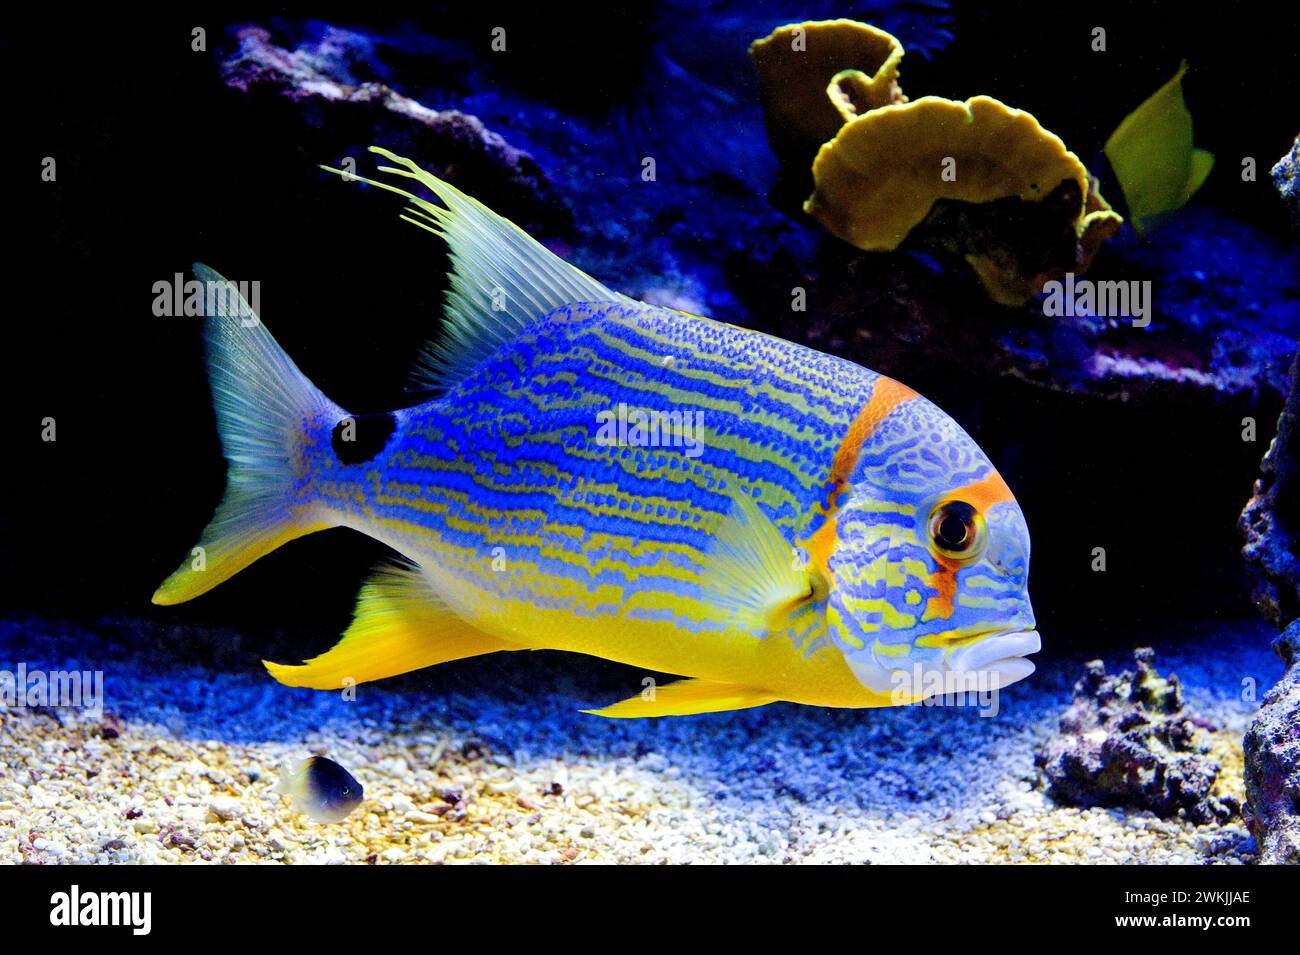 Blue-lined seabream or sailfin snapper (Symphorichthys spilurus) is a marine fish native to coral reefs of Indo-Pacific Ocean. Stock Photo